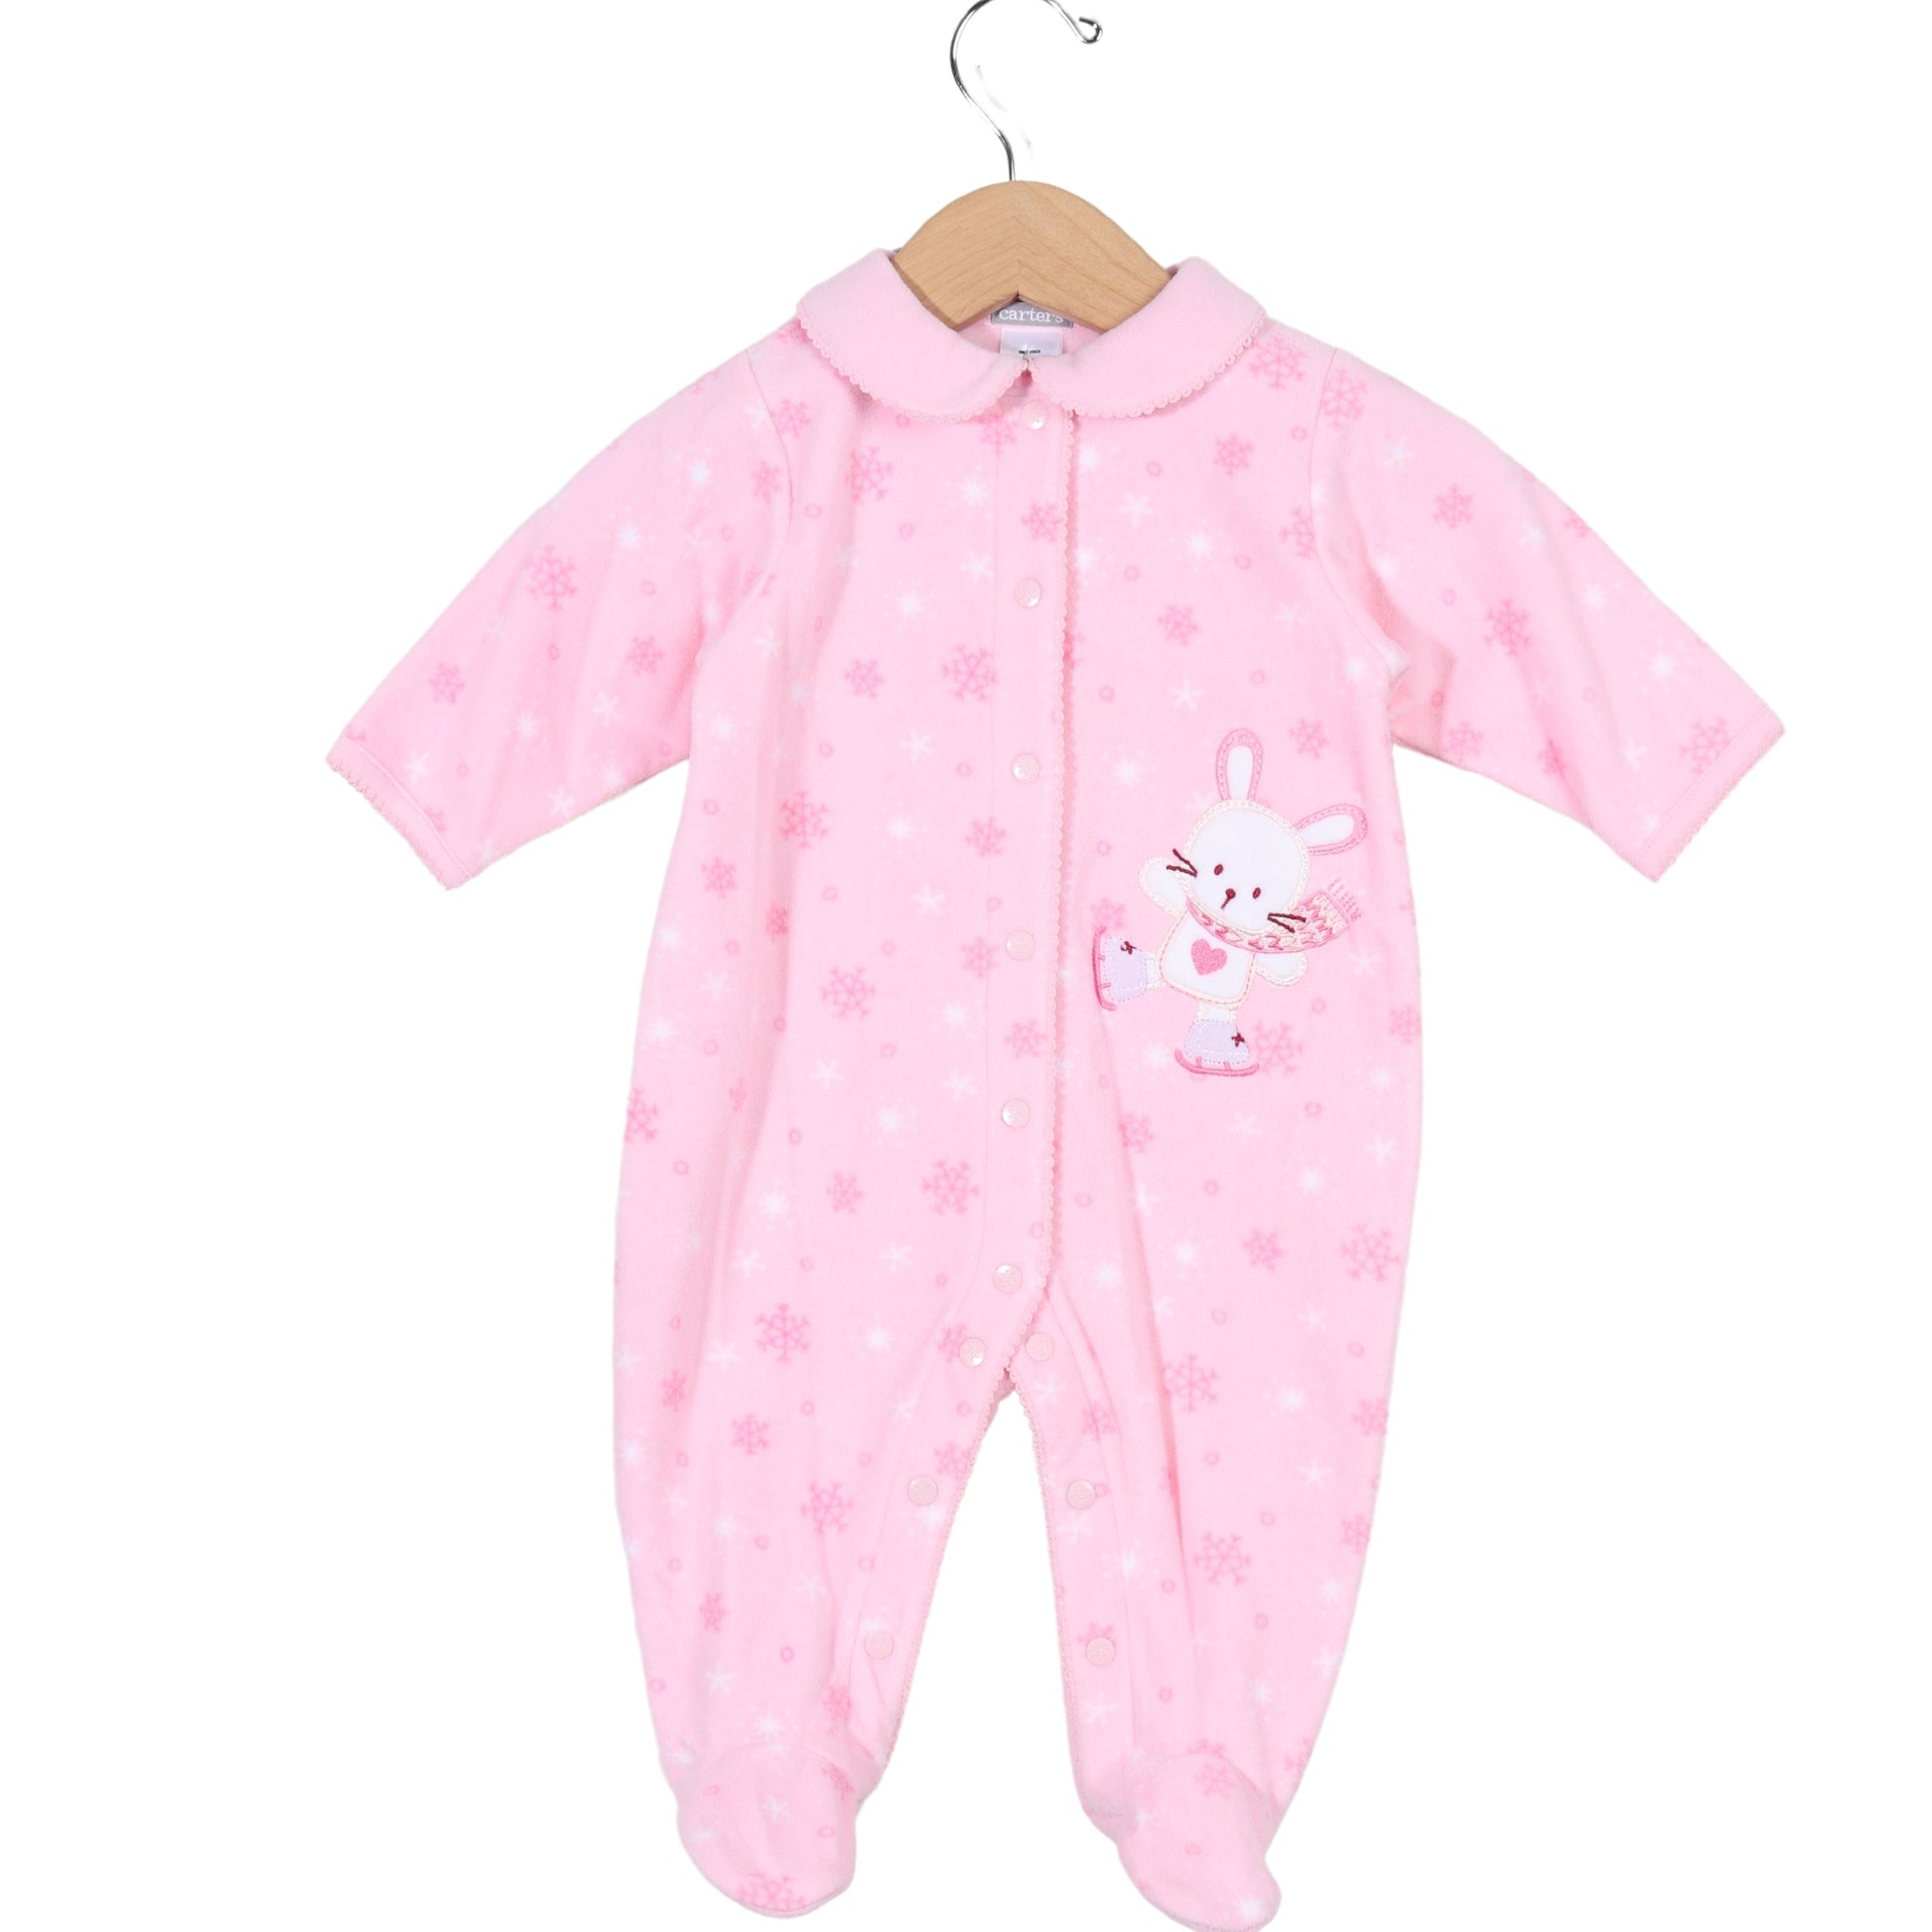 CARTER'S Baby Girl 6 Month / Pink CARTER'S - Baby - Printed Overall